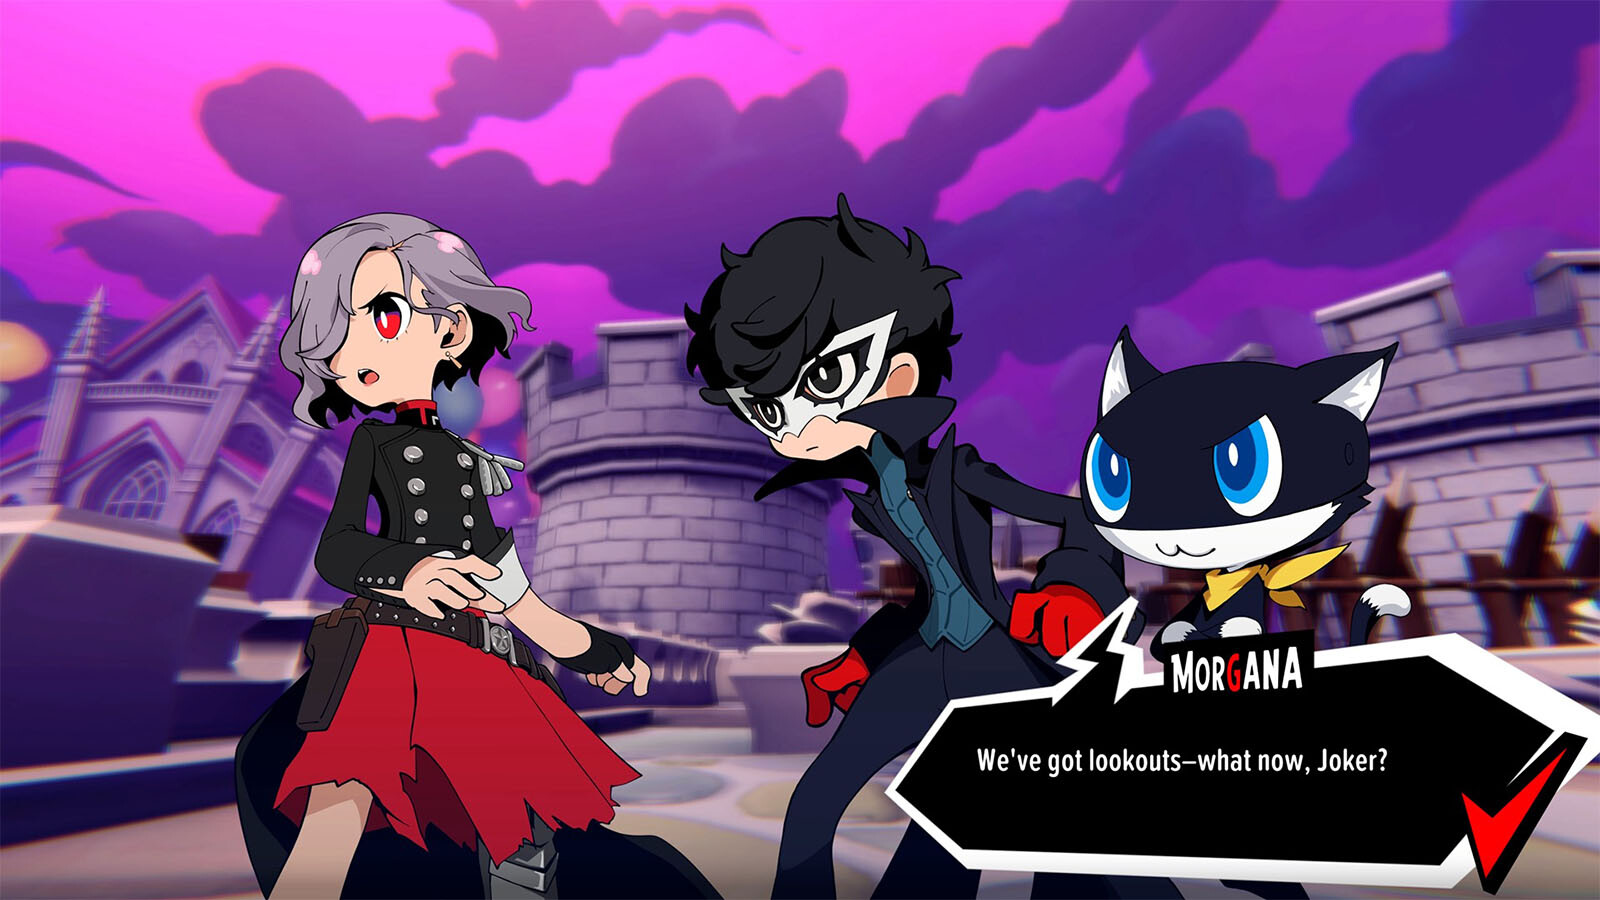 Buy Persona 5 Tactica: Digital Deluxe Edition from the Humble Store